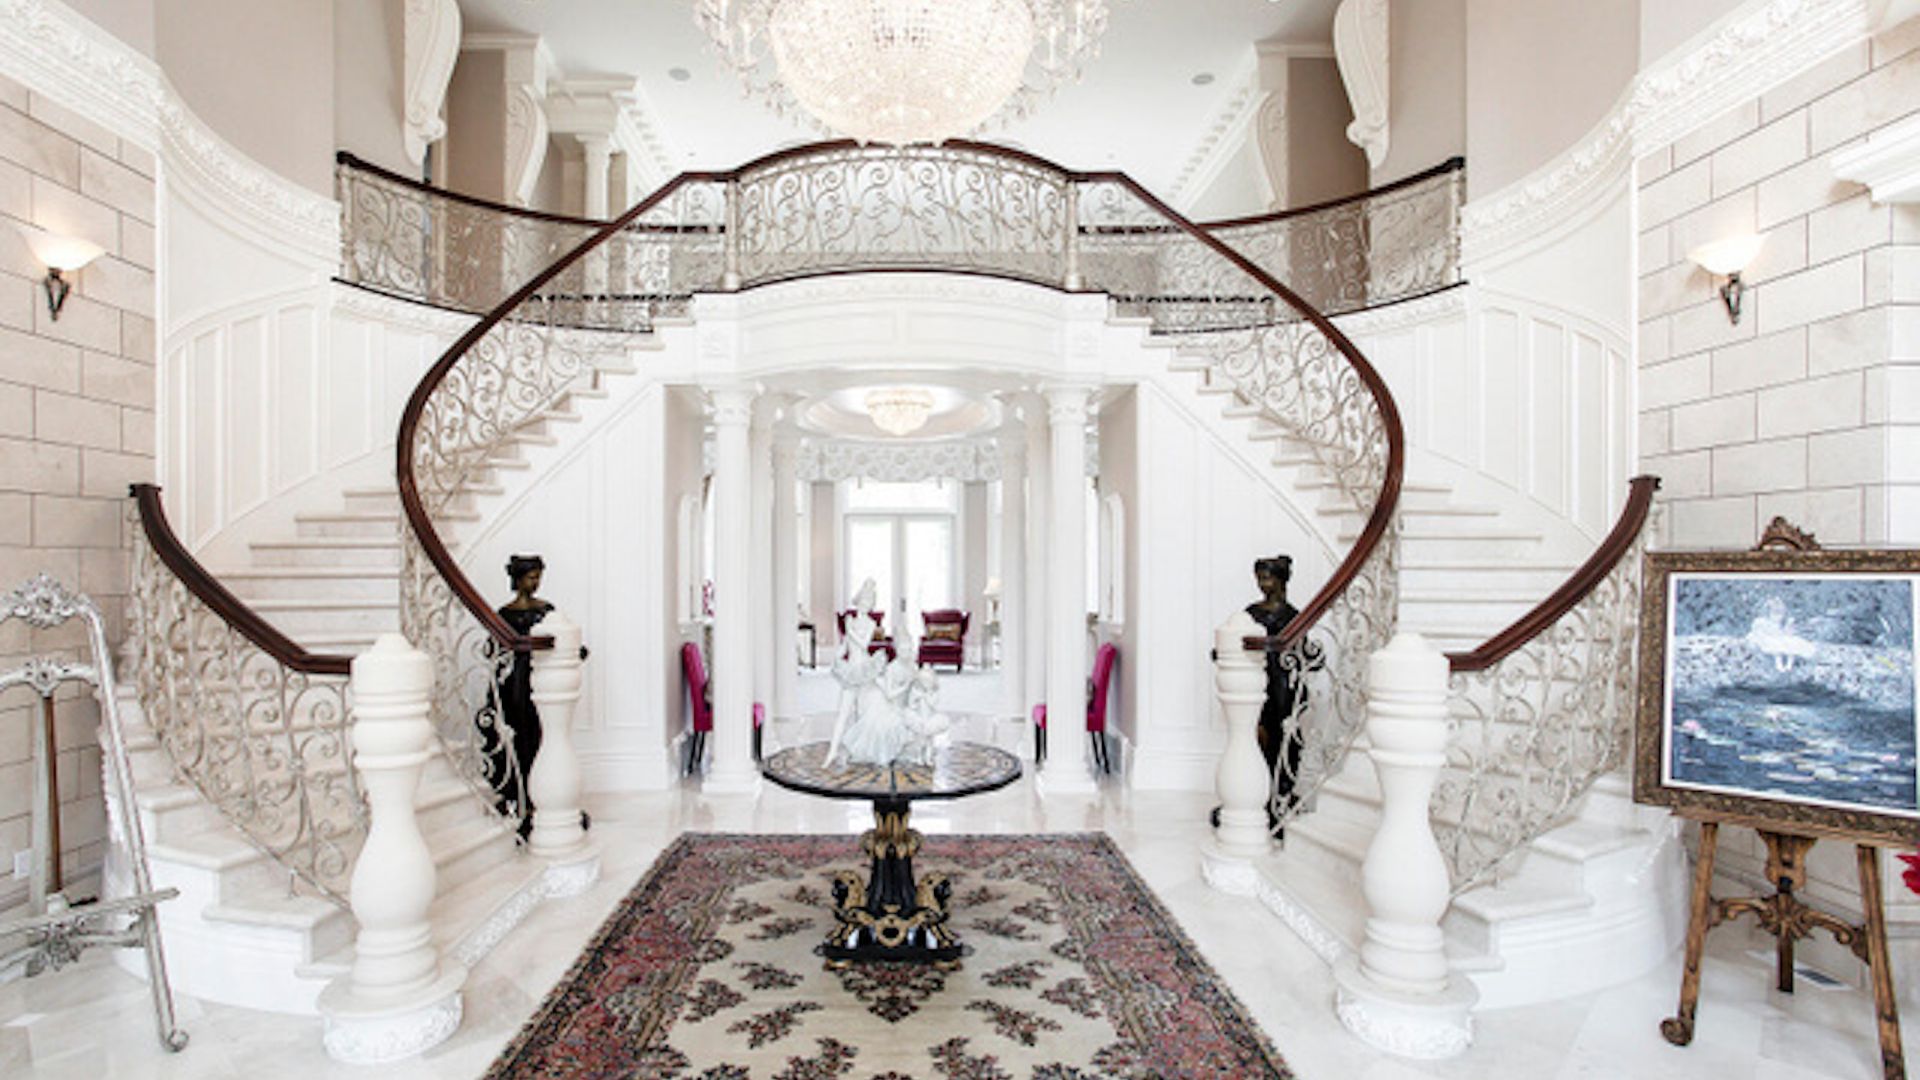 Two staircases wrap around a grand entryway, with a chandelier hanging from the ceiling.